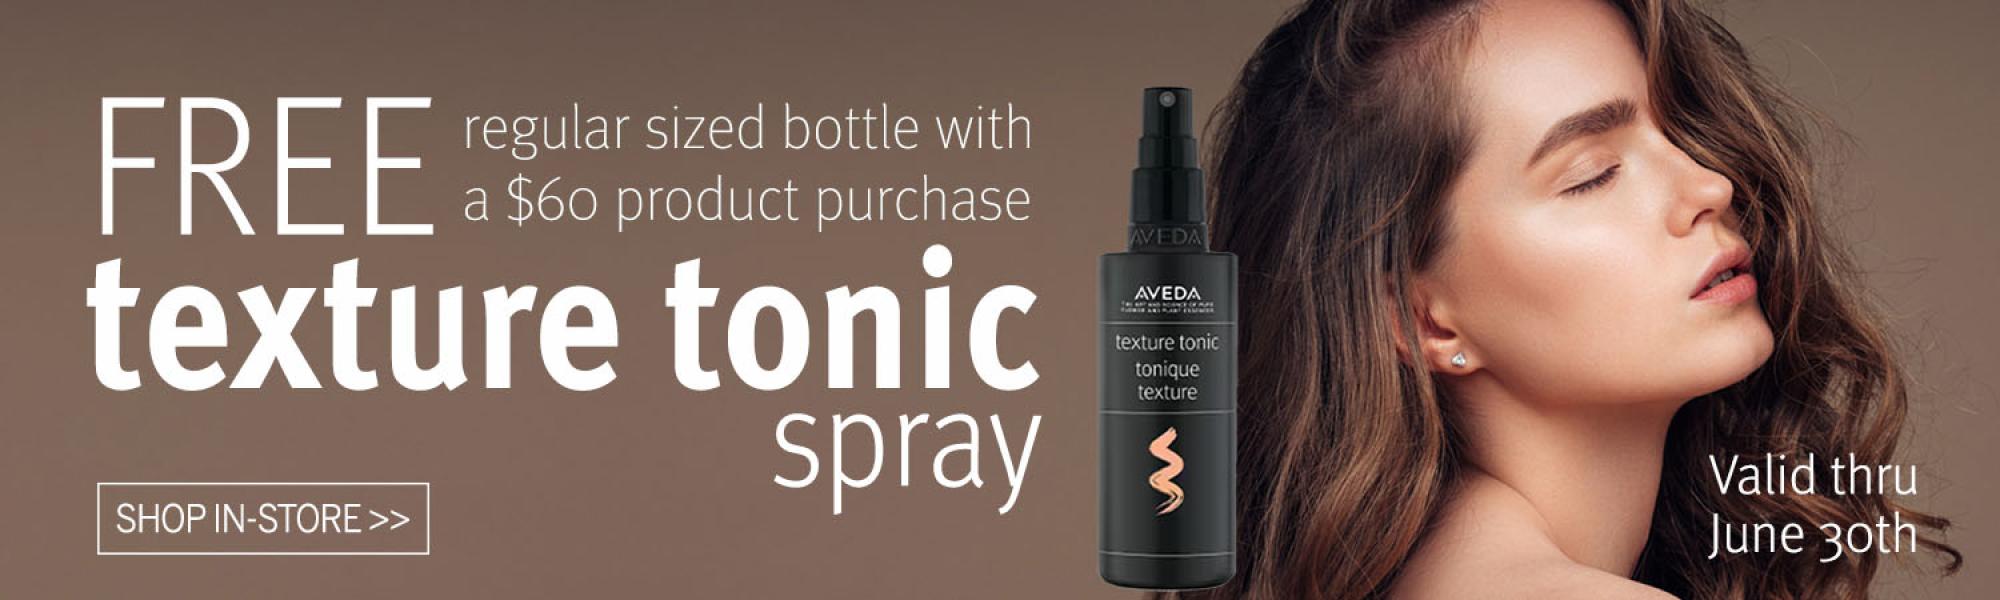 Image of our June Promo - Free regular sized bottle of texture tonic with a $60 product purchase